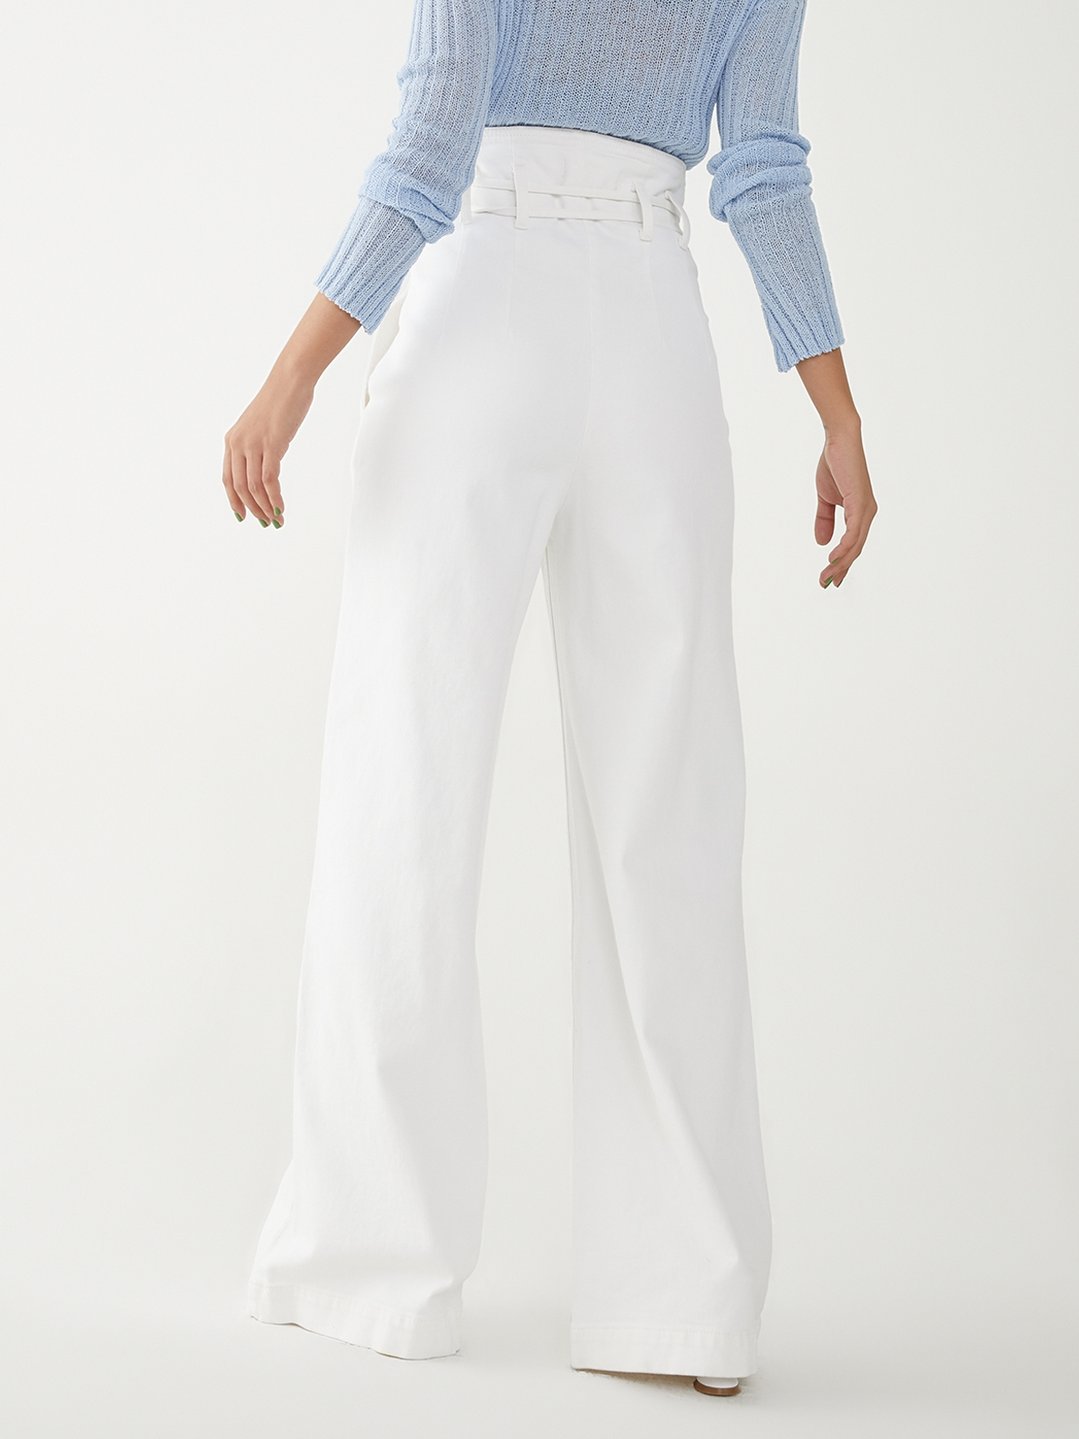 Sustainable High-waisted Wide Leg Pants - White - Pomelo Fashion